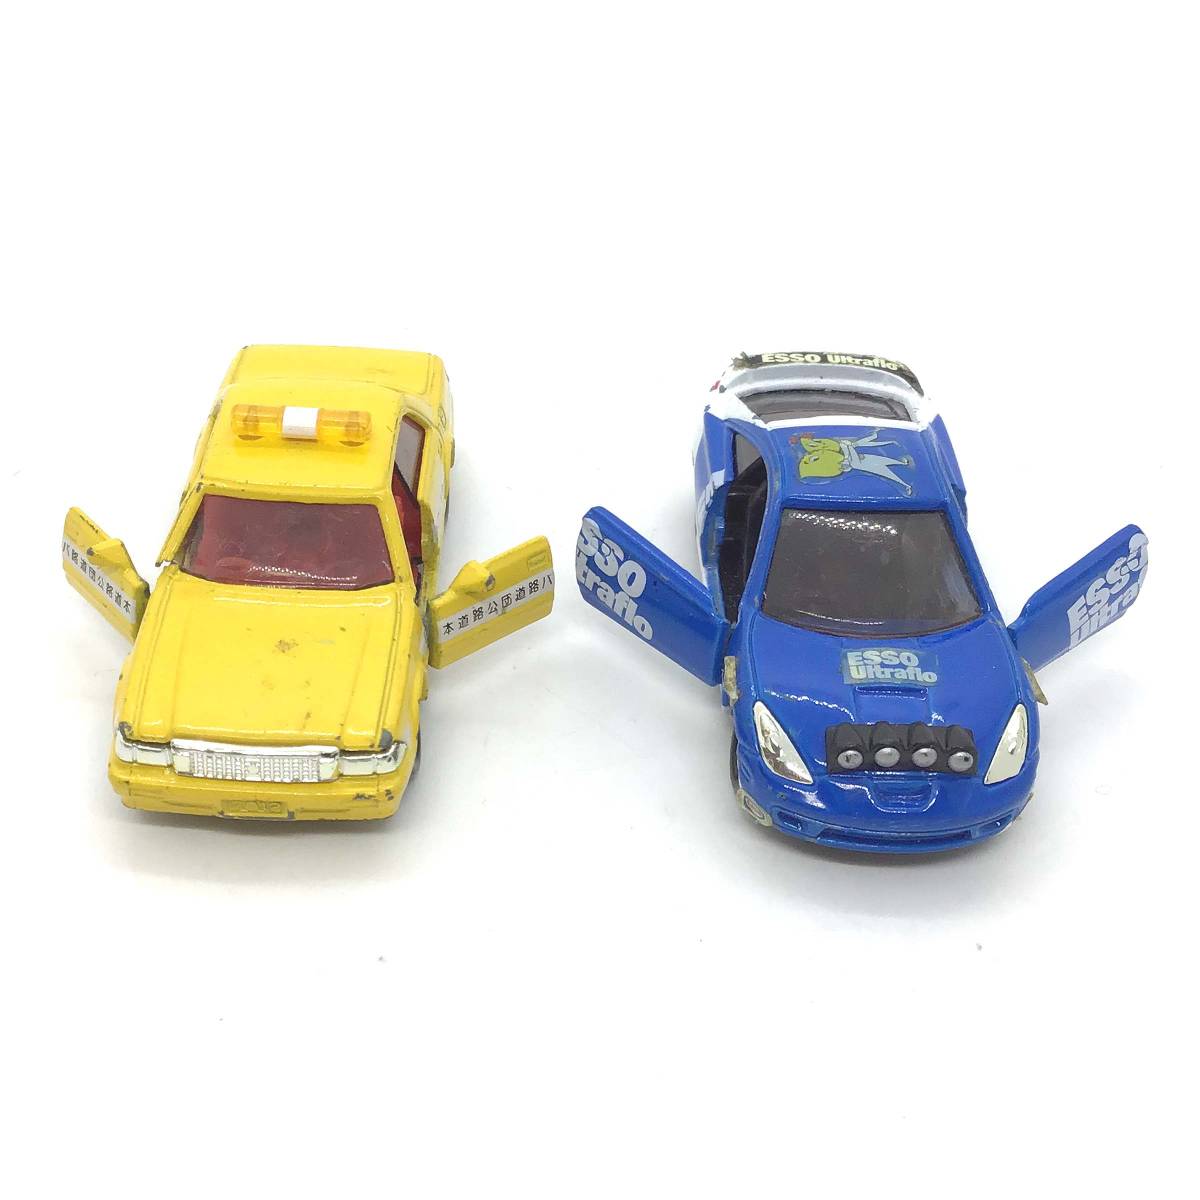 CL【tomica】TOYOTA CROWN No.55 CELICA No.96 2台セット トミカ コレクション ミニカー おもちゃ 玩具 トヨタ_画像6